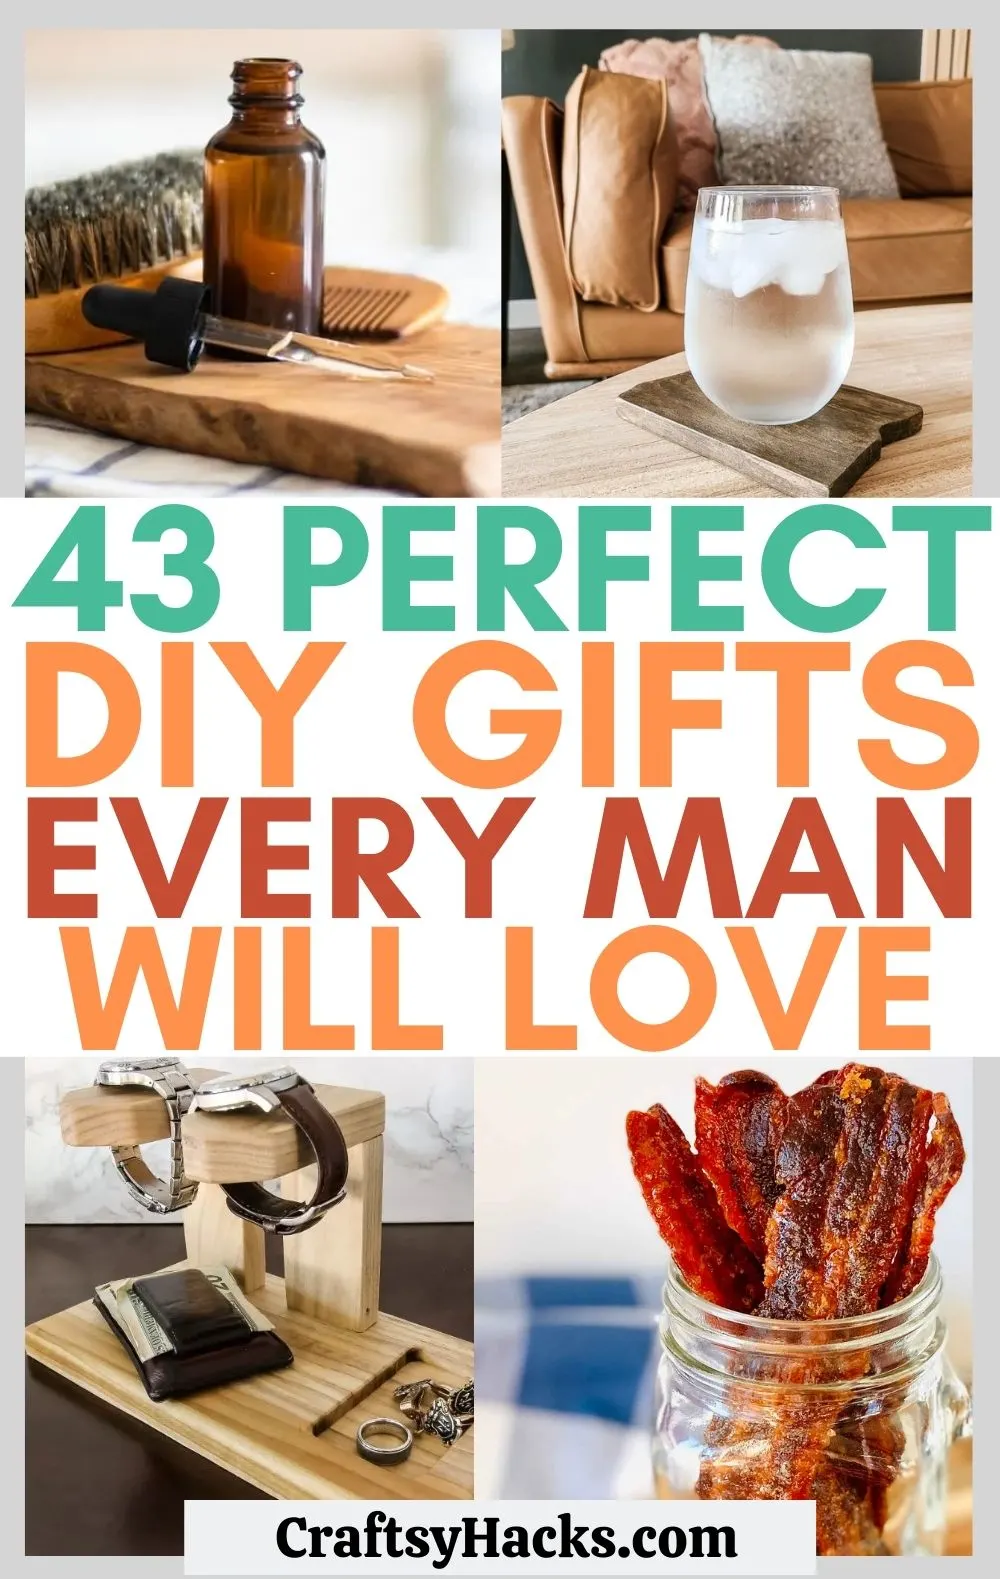 12 Gift Ideas for Men: Birthday Gift Ideas for Husband & Father's Day Gifts-cokhiquangminh.vn